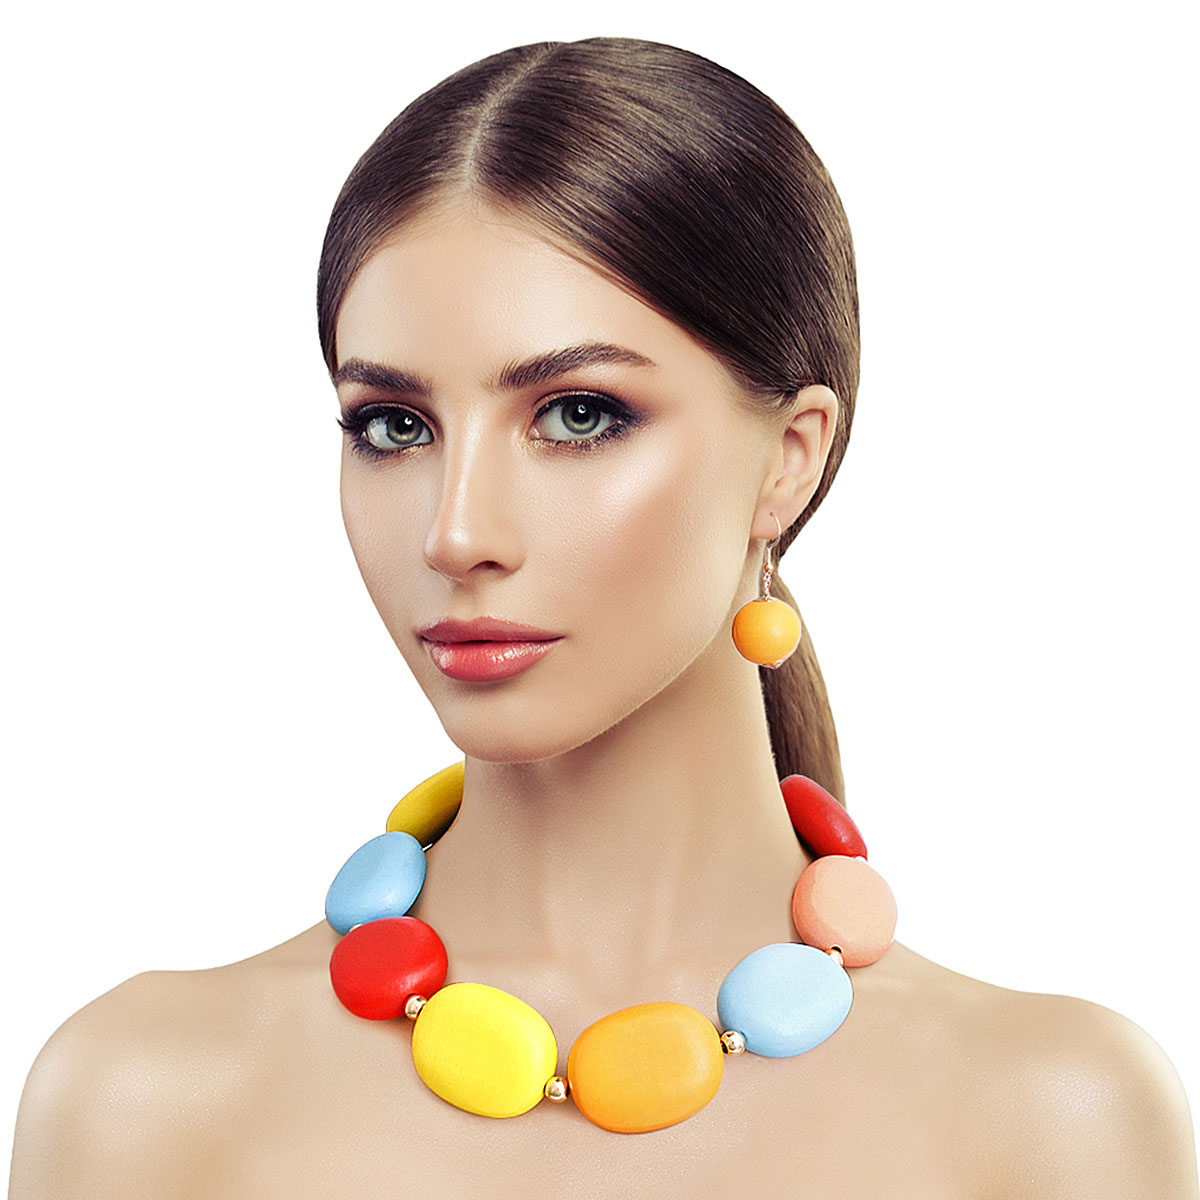 Light Multi Wooden Disc Necklace